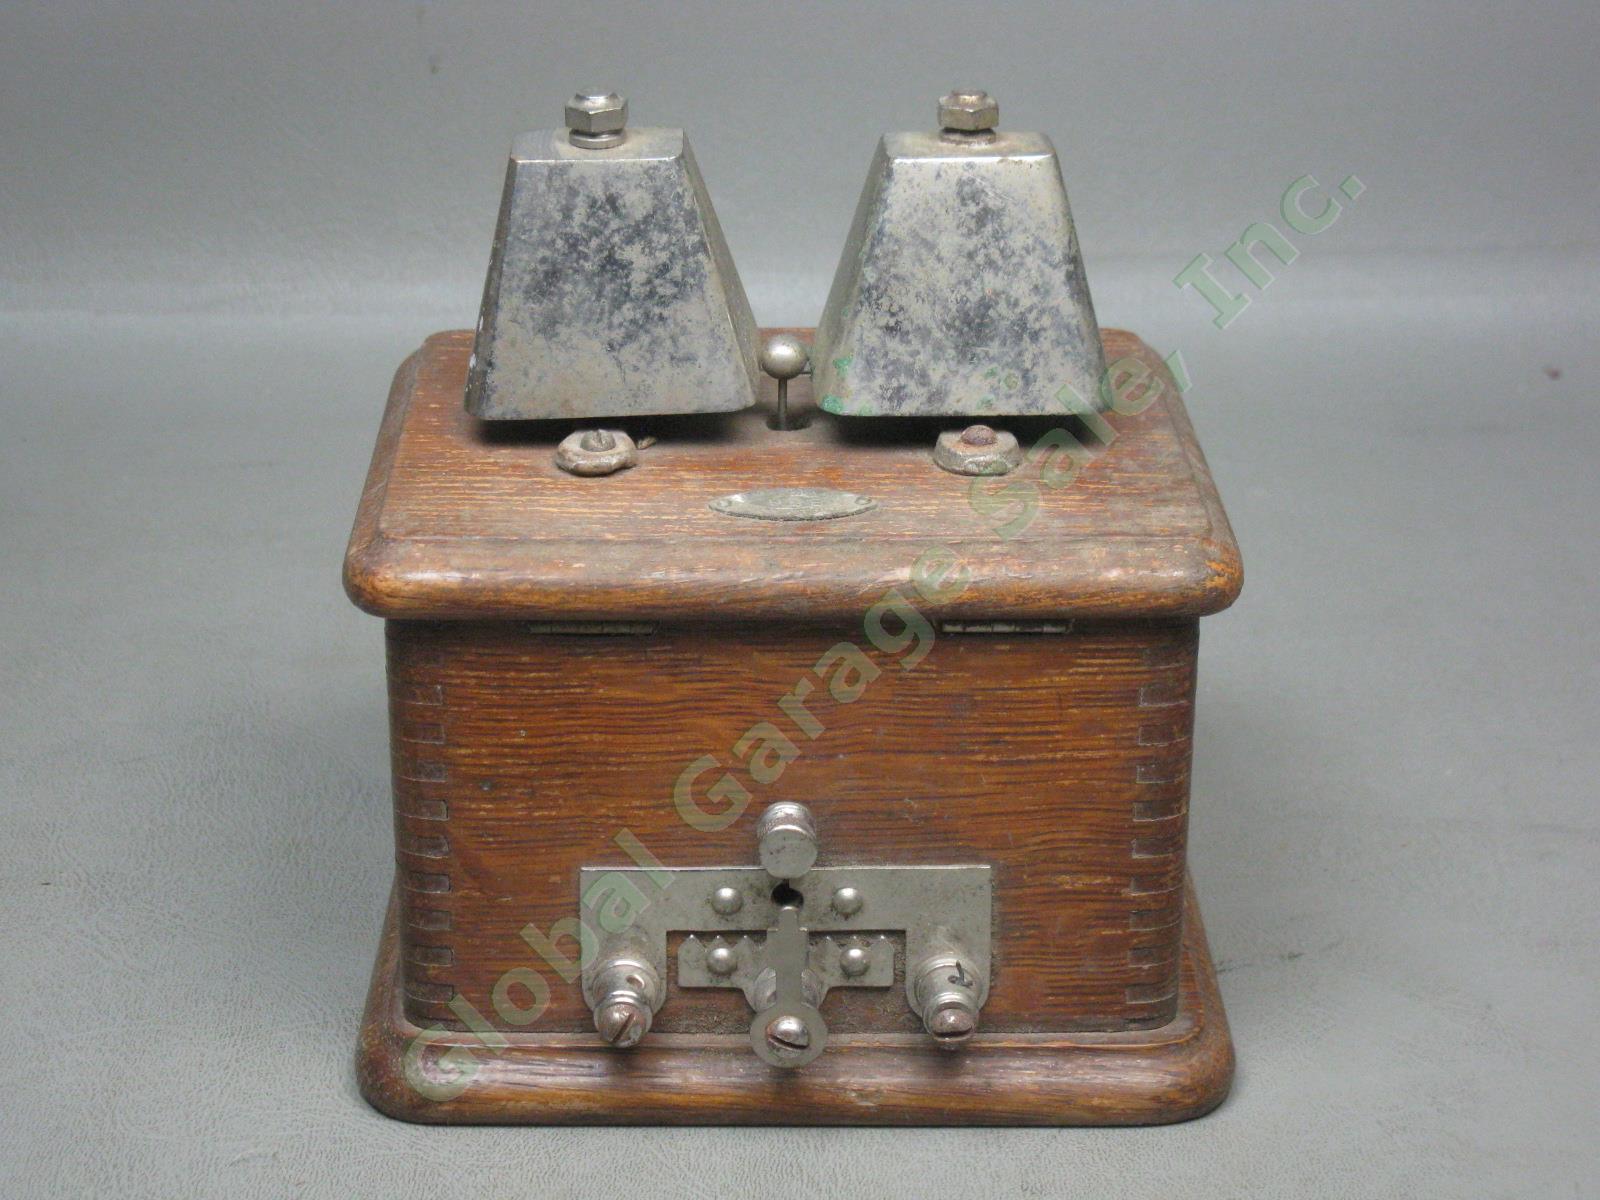 Antique Oak Man Electric Supply Co 886 500 Telephone Ringer Box No Reserve Price